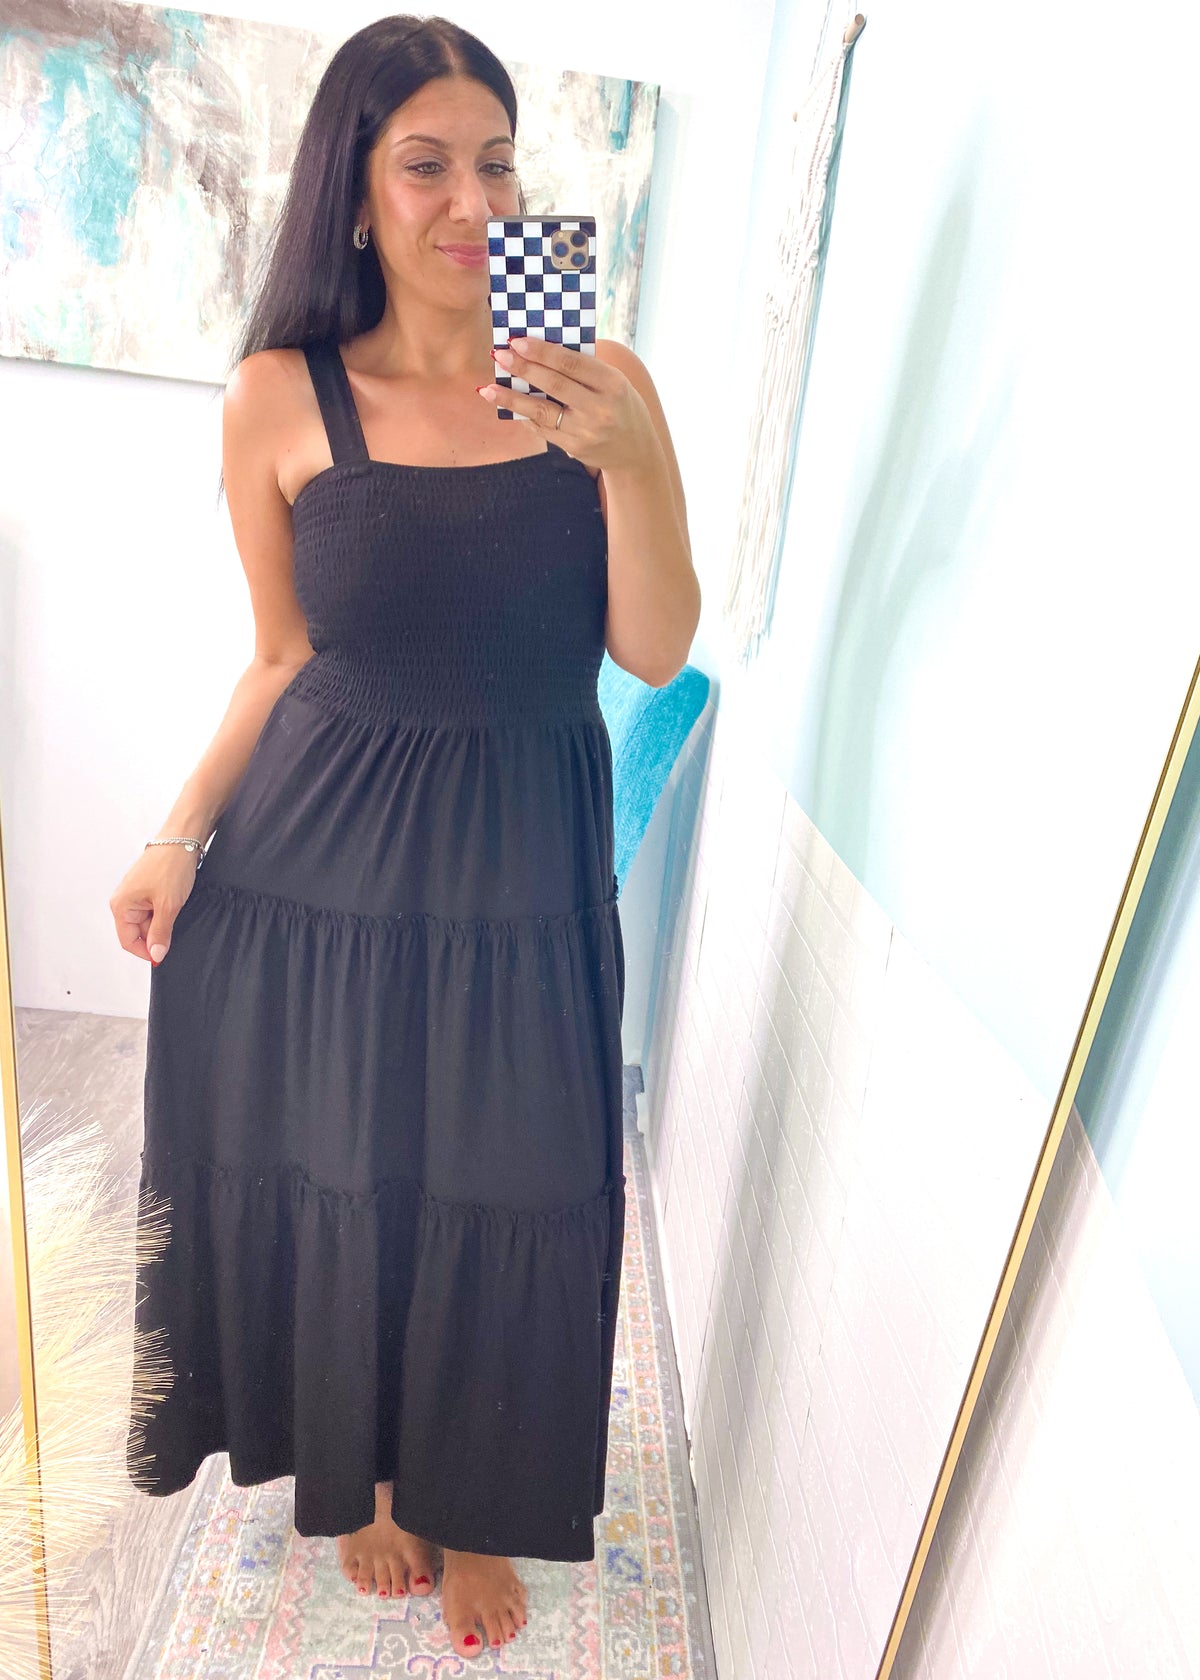 'High Tide' Black Smocked Tiered Midi Dress-Easy, breezy! It doesn't get any easier to put an outfit together than this black smocked top midi dress. It's flowy and can be layered with your favorite button front tops/jackets. Dress it up or wear casual with sneakers &amp; sandals!-Cali Moon Boutique, Plainville Connecticut